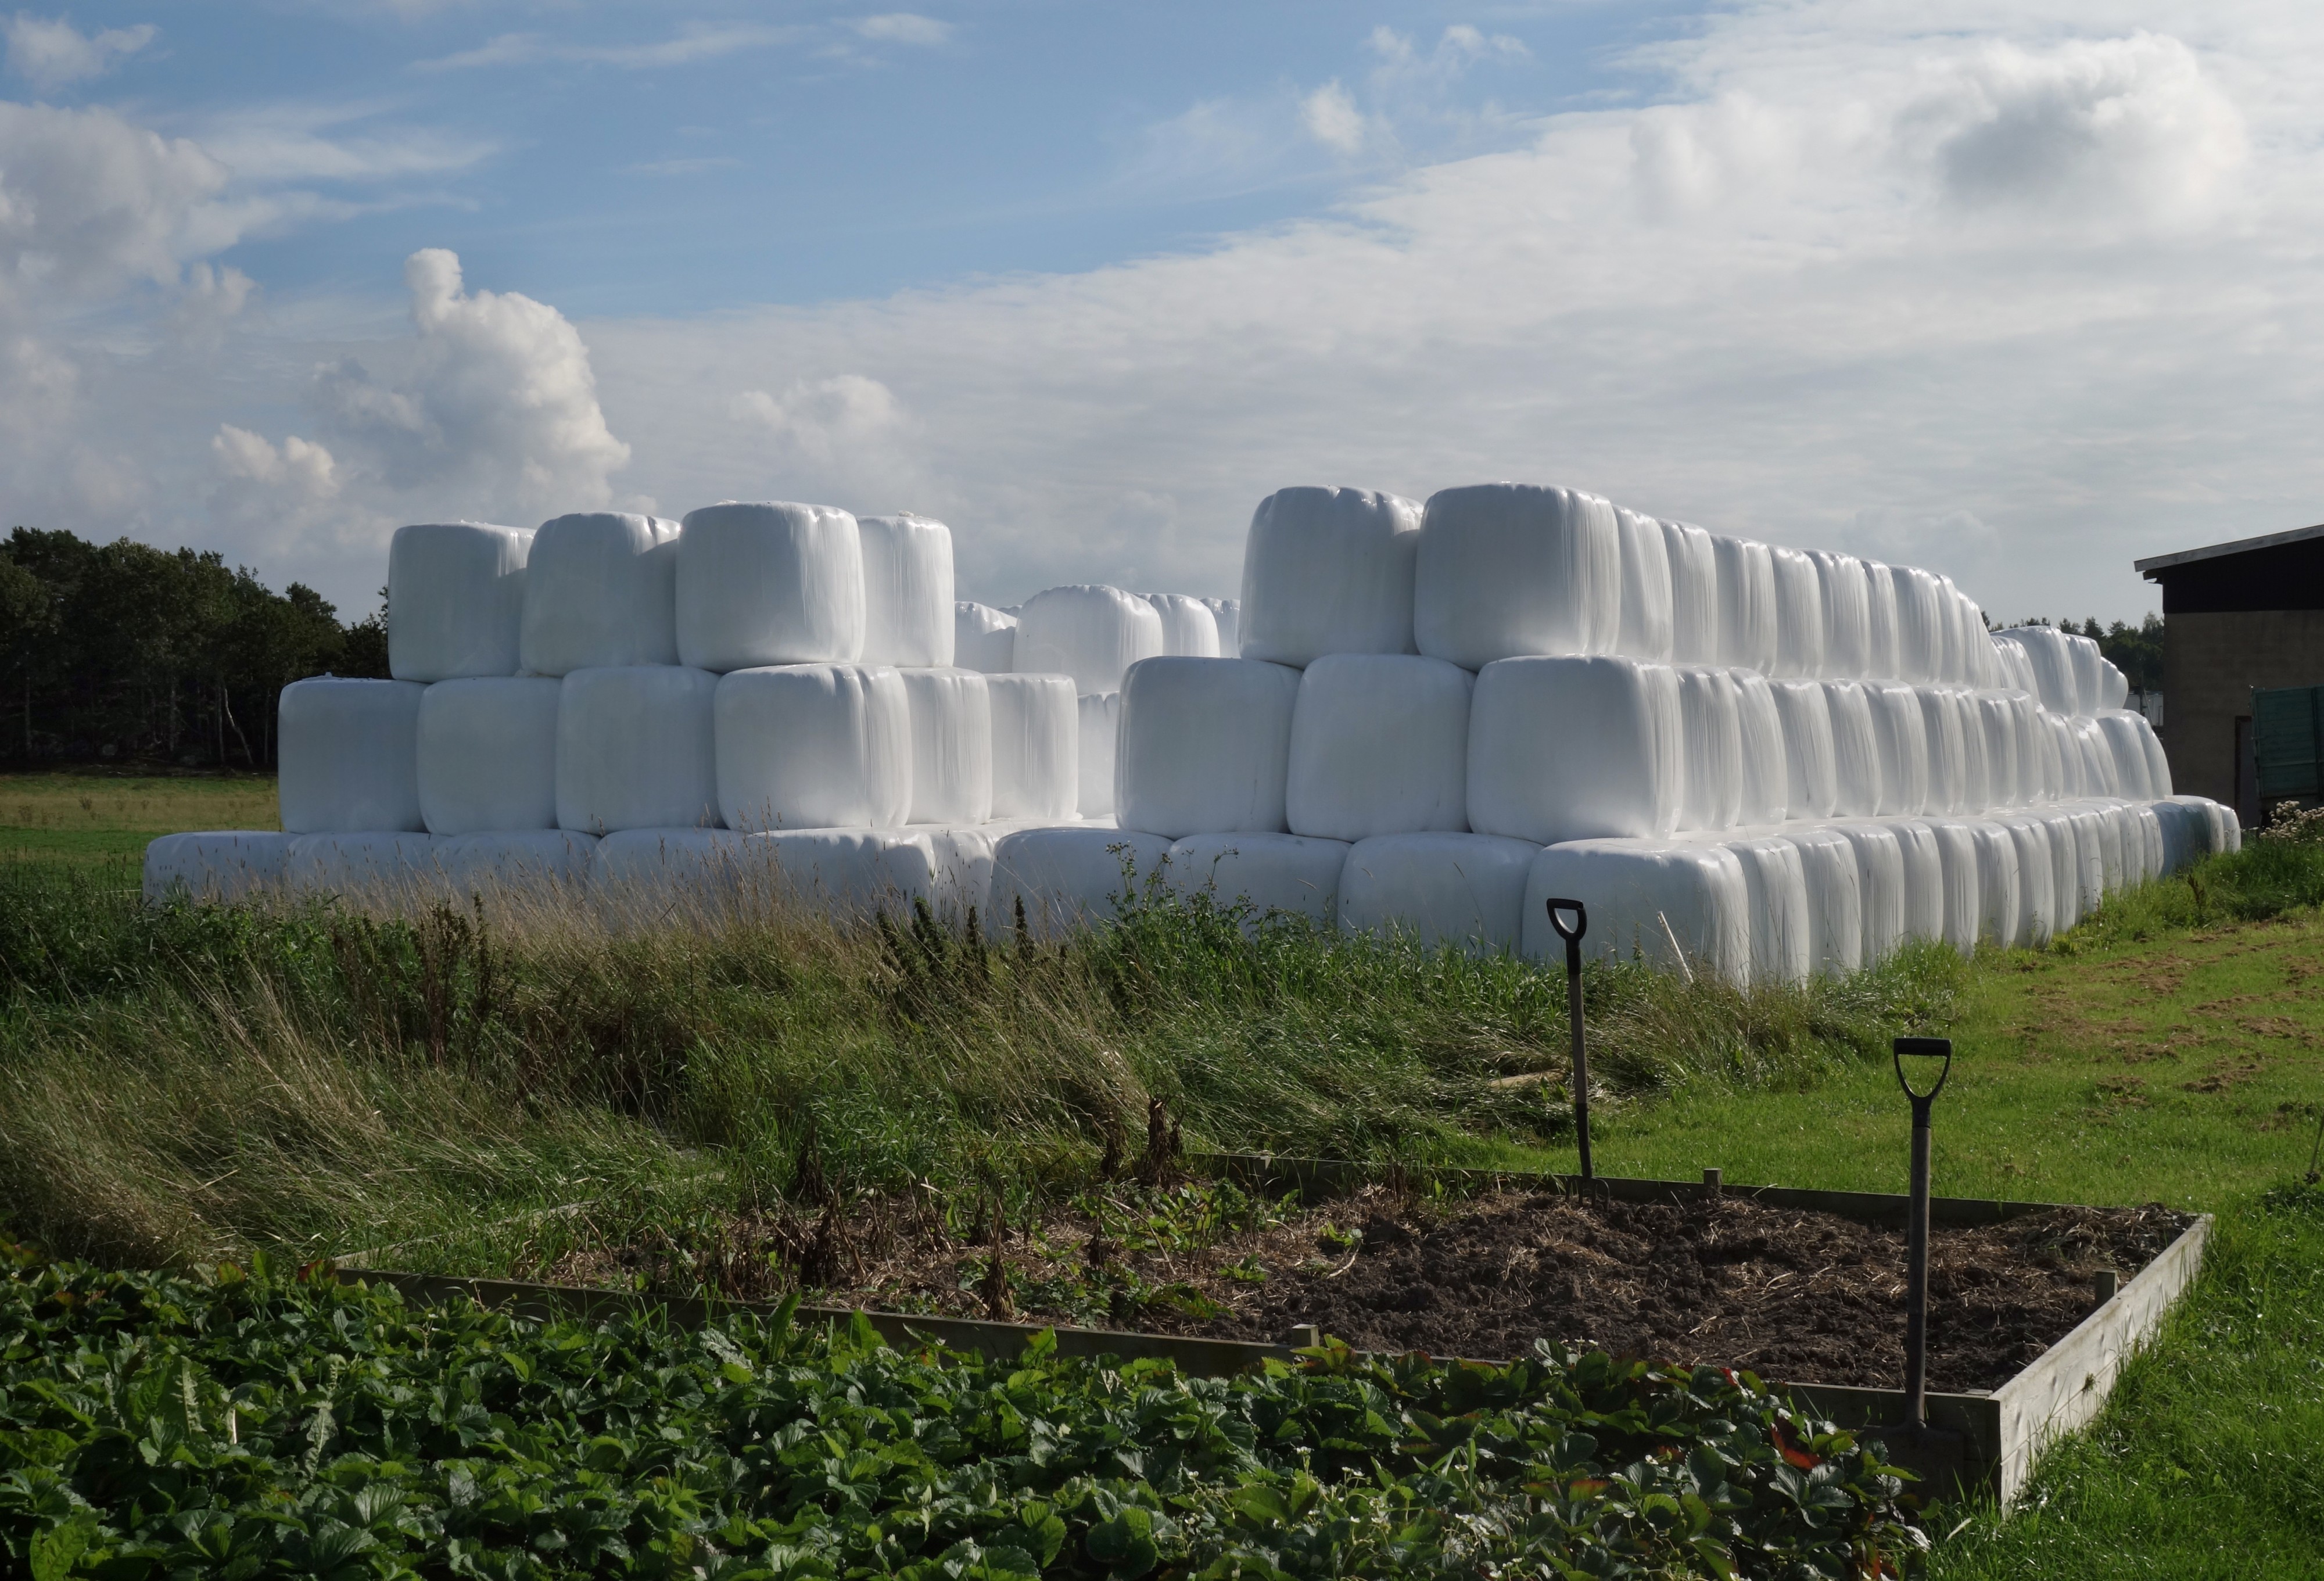 Two stacks of silage bales